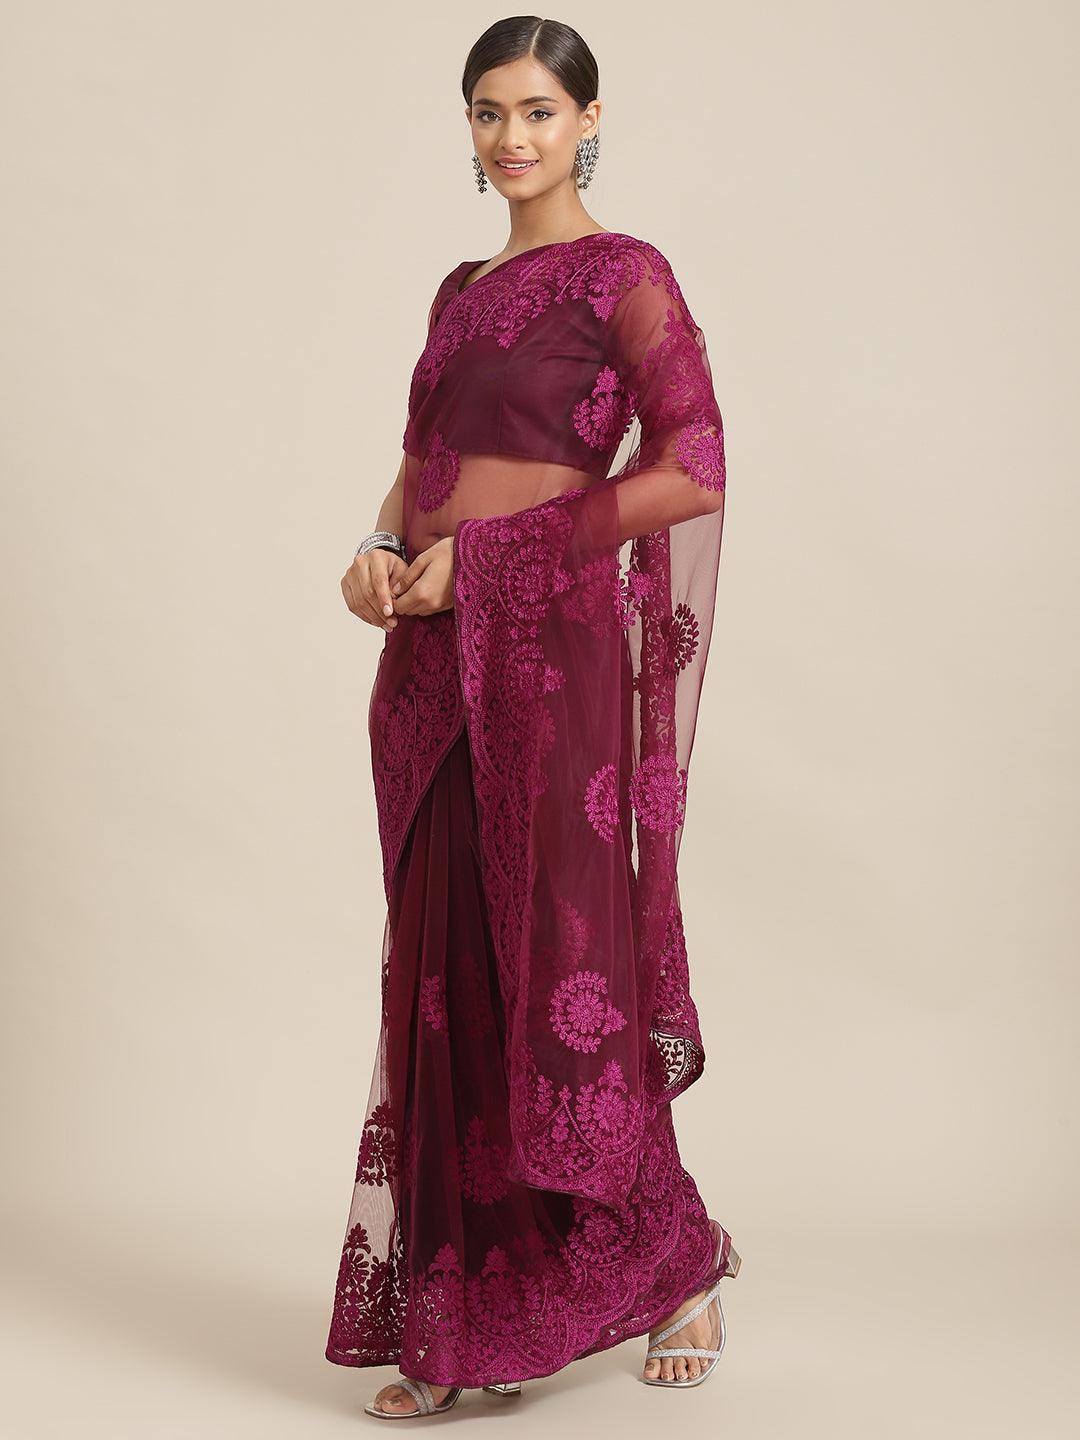 Stylish Purple Floral Embroidered Net Saree With Blouse - Indiakreations